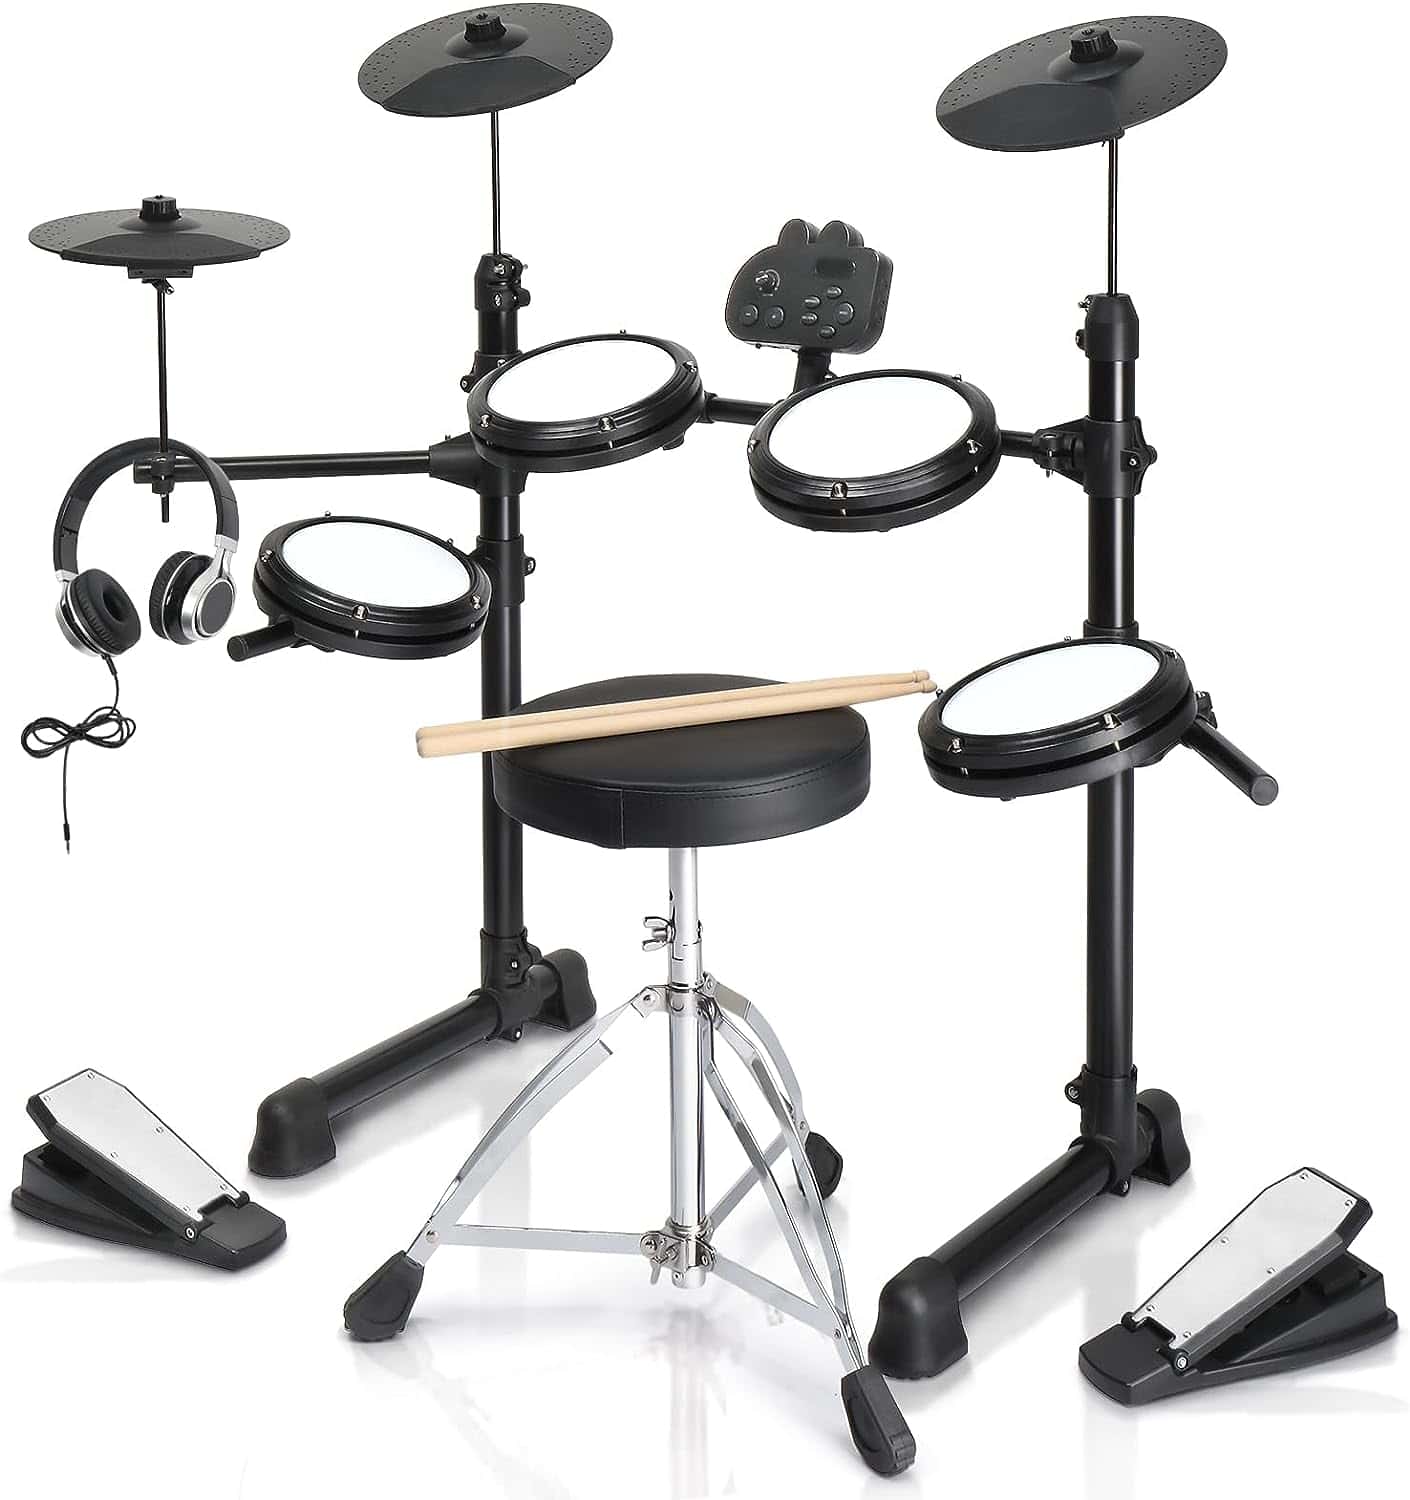 Ktaxon Electric Drum Set, Electronic Drum Set with Mesh Drum, Cymbals, Adjustable Throne, Headphones, Sticks, Pedals and Velcros, Electric Drums with 150 Sounds and 10 Demos for Beginner